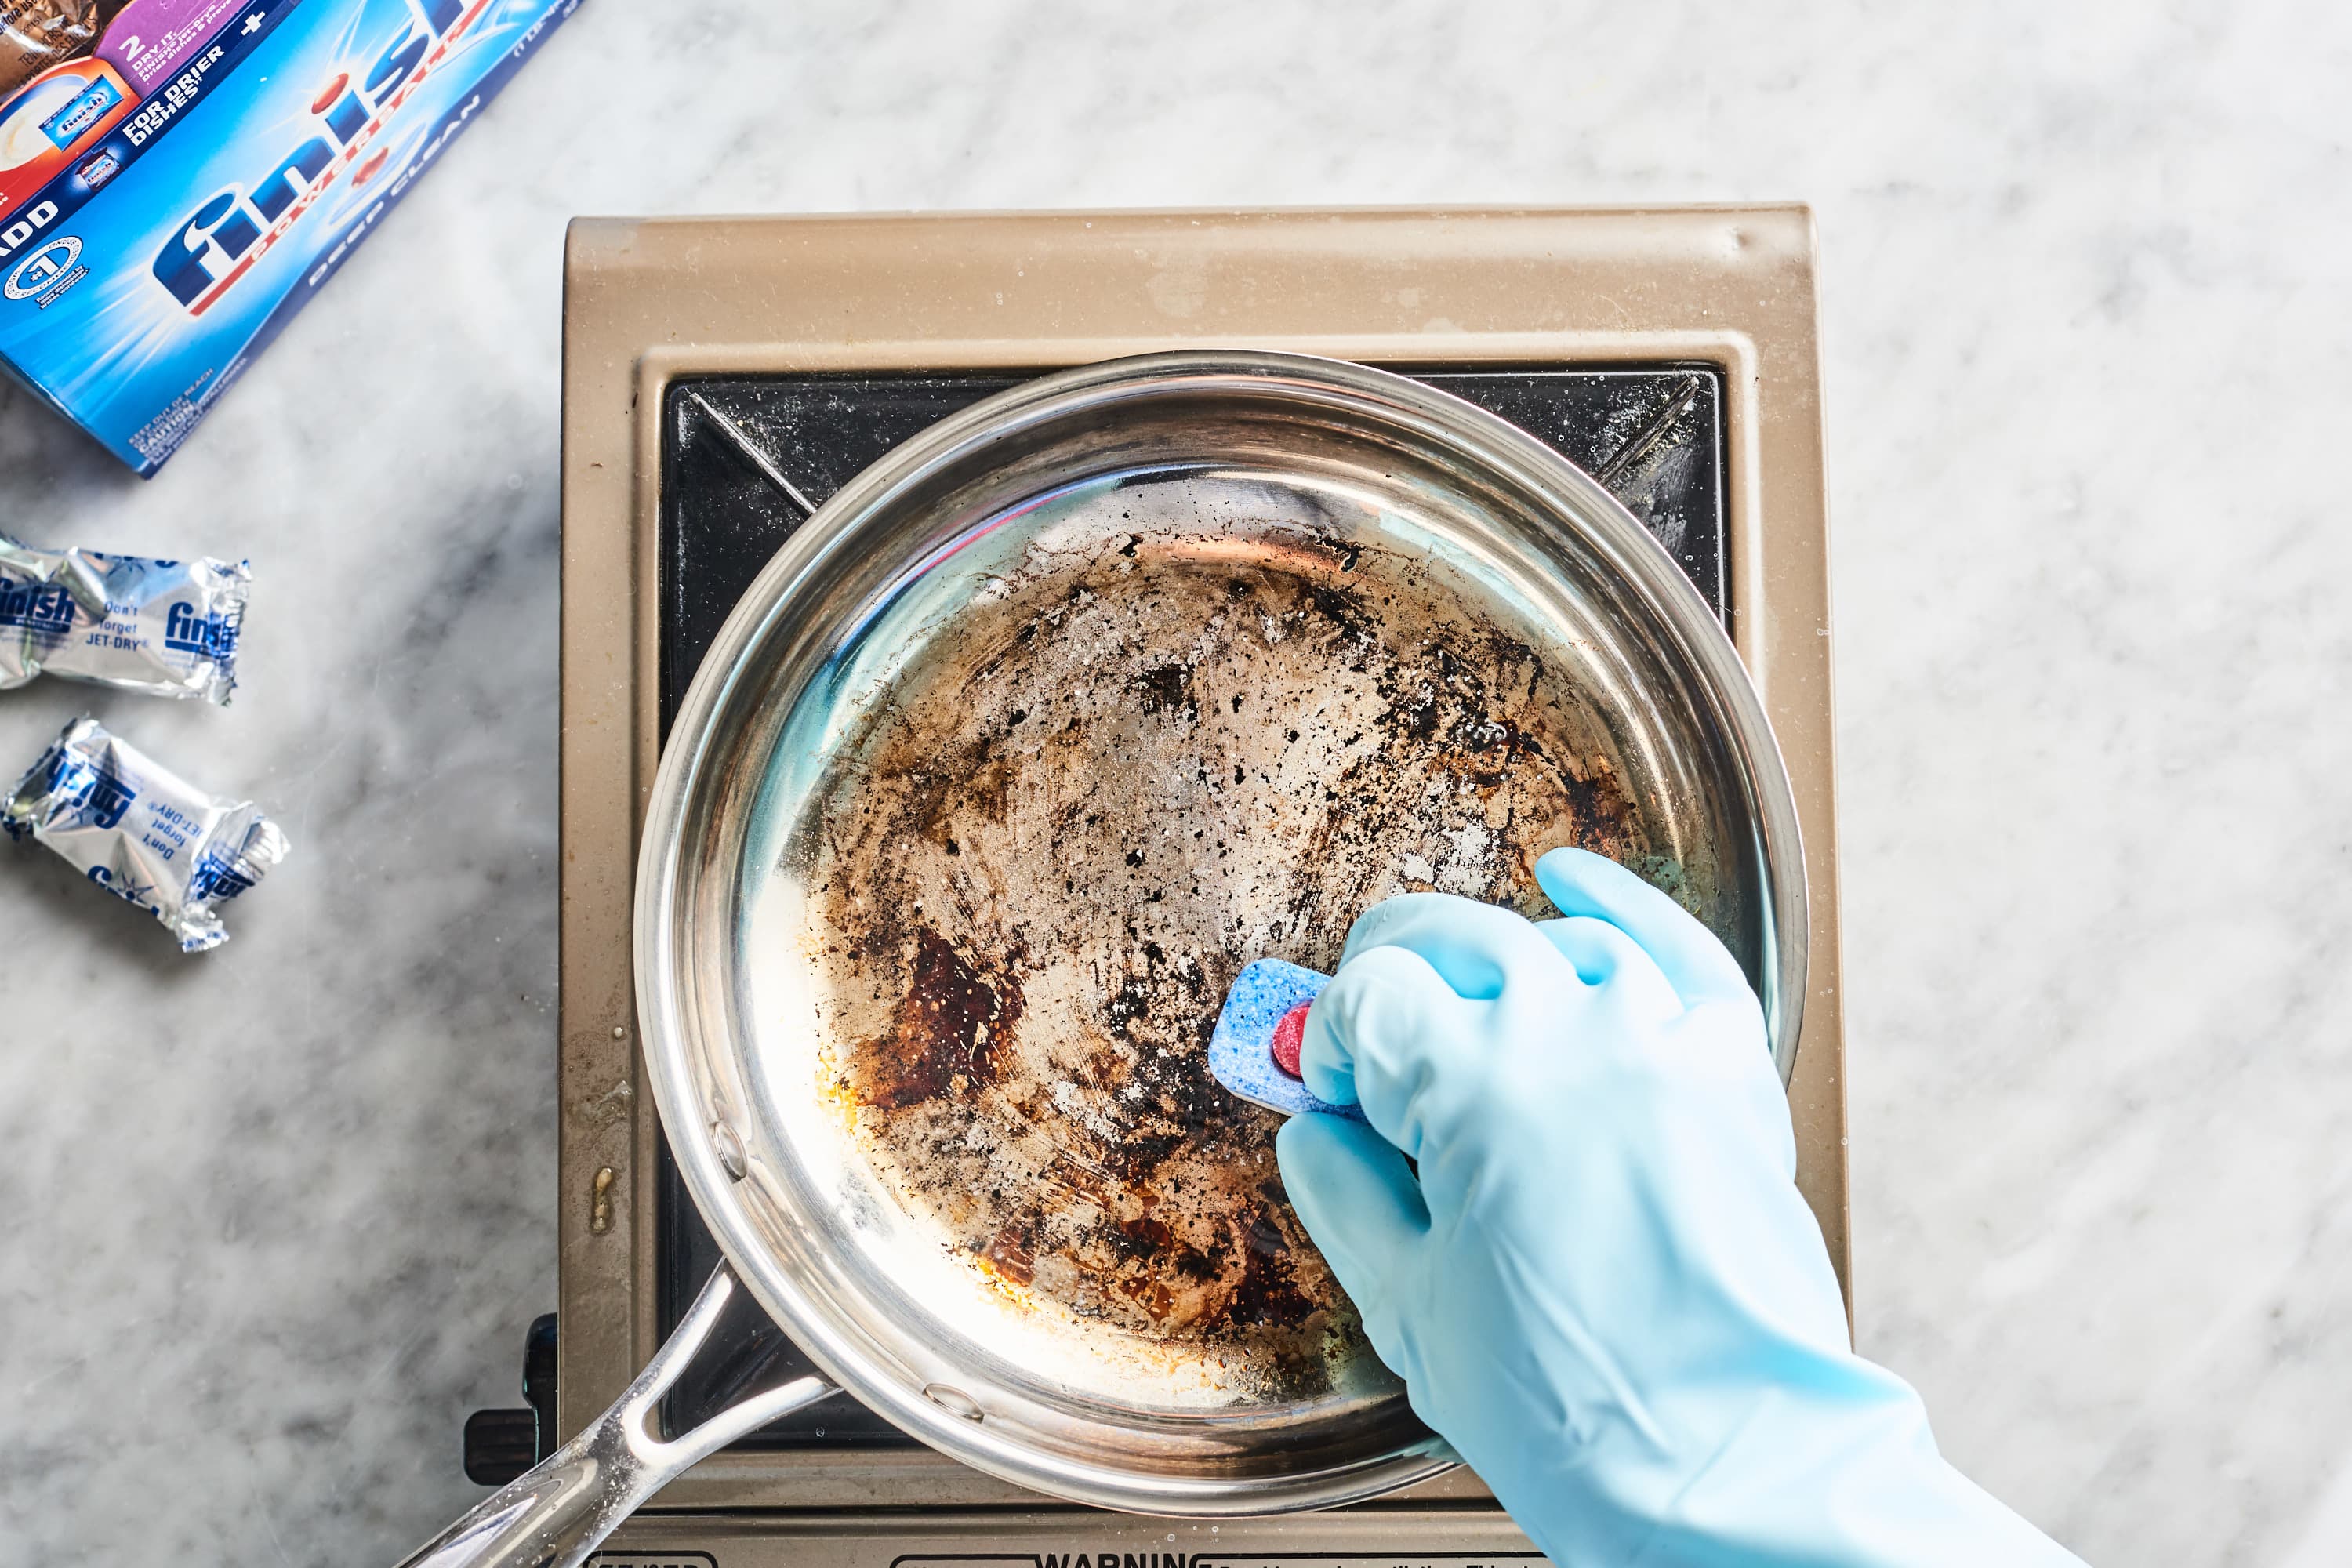 Use Vinegar and Baking Soday to Clean Burnt Pans - Mom 4 Real